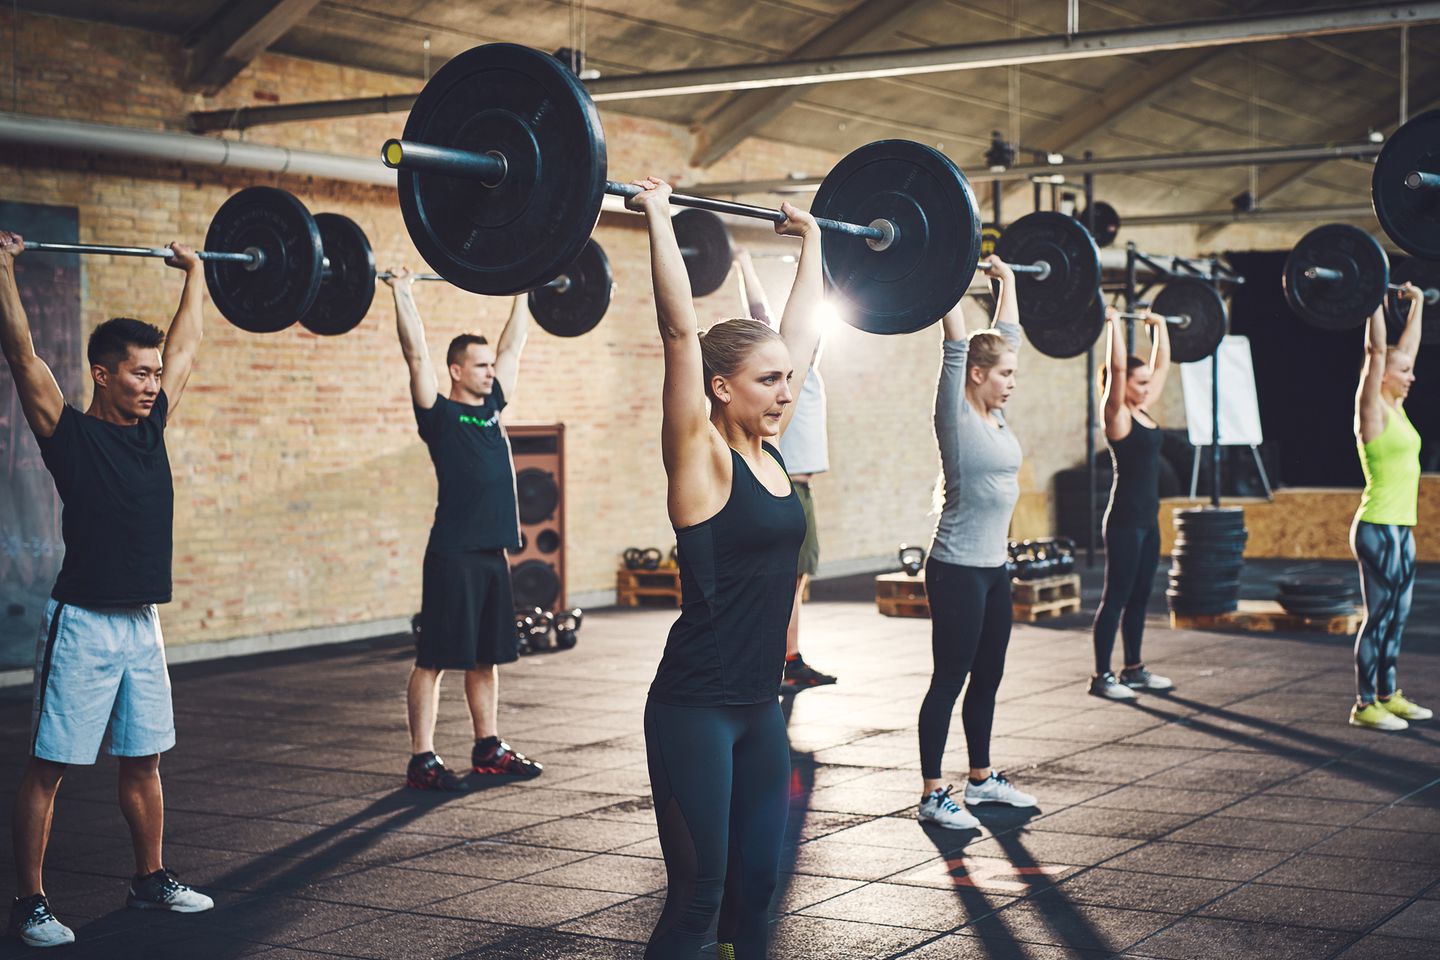 Could swearing make you stronger at the gym? Maybe, so drop those F ...